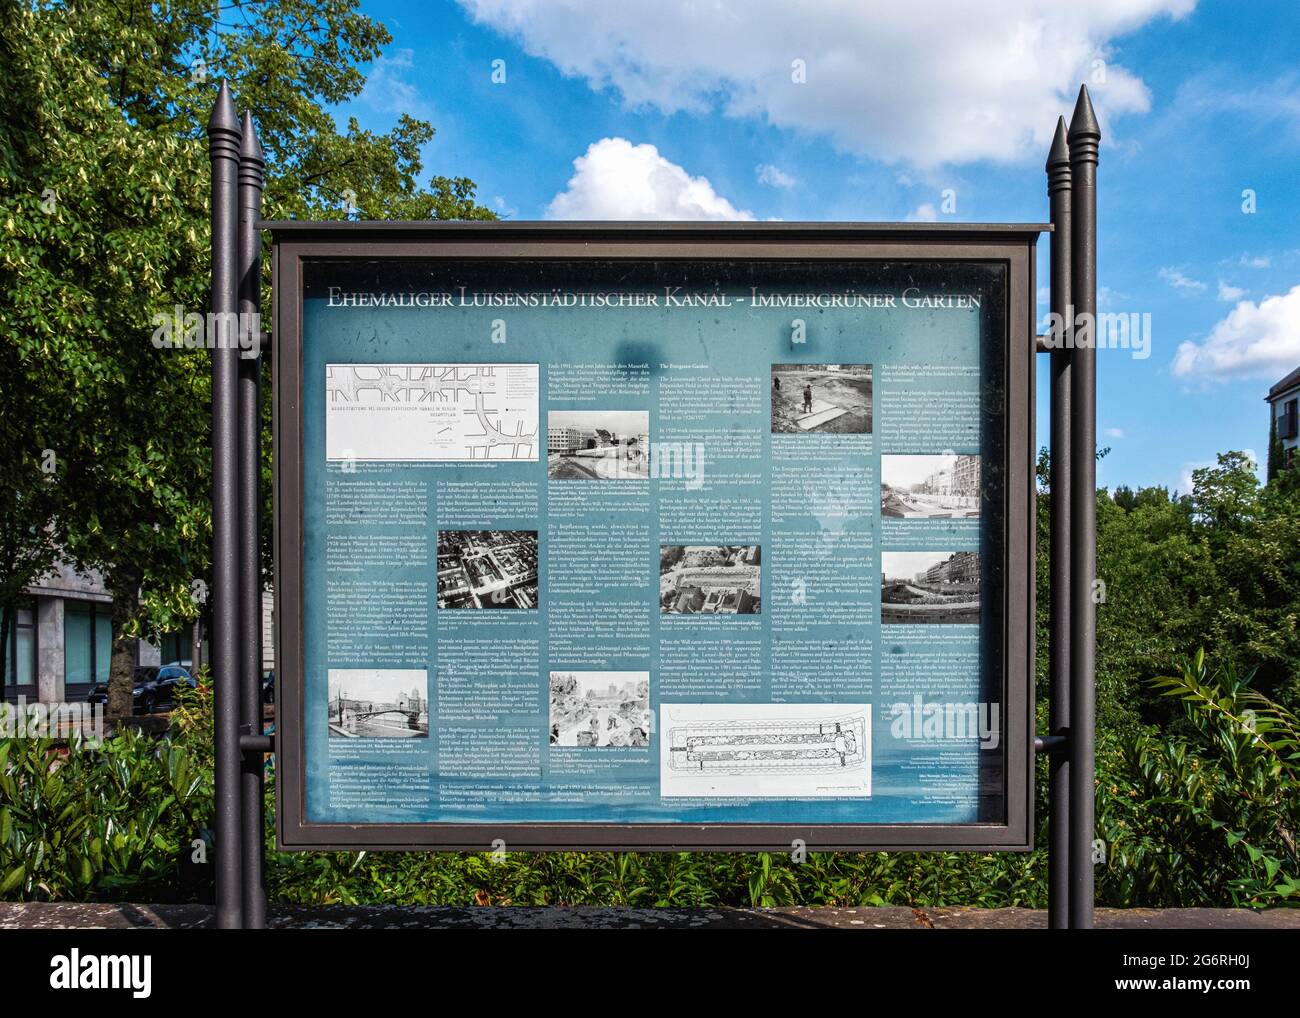 Information board - Luisenstadt canal designed by town planner Lenné.The 2 kilometre long drained canal site now a park & gardens in Kreuzberg, Berlin Stock Photo